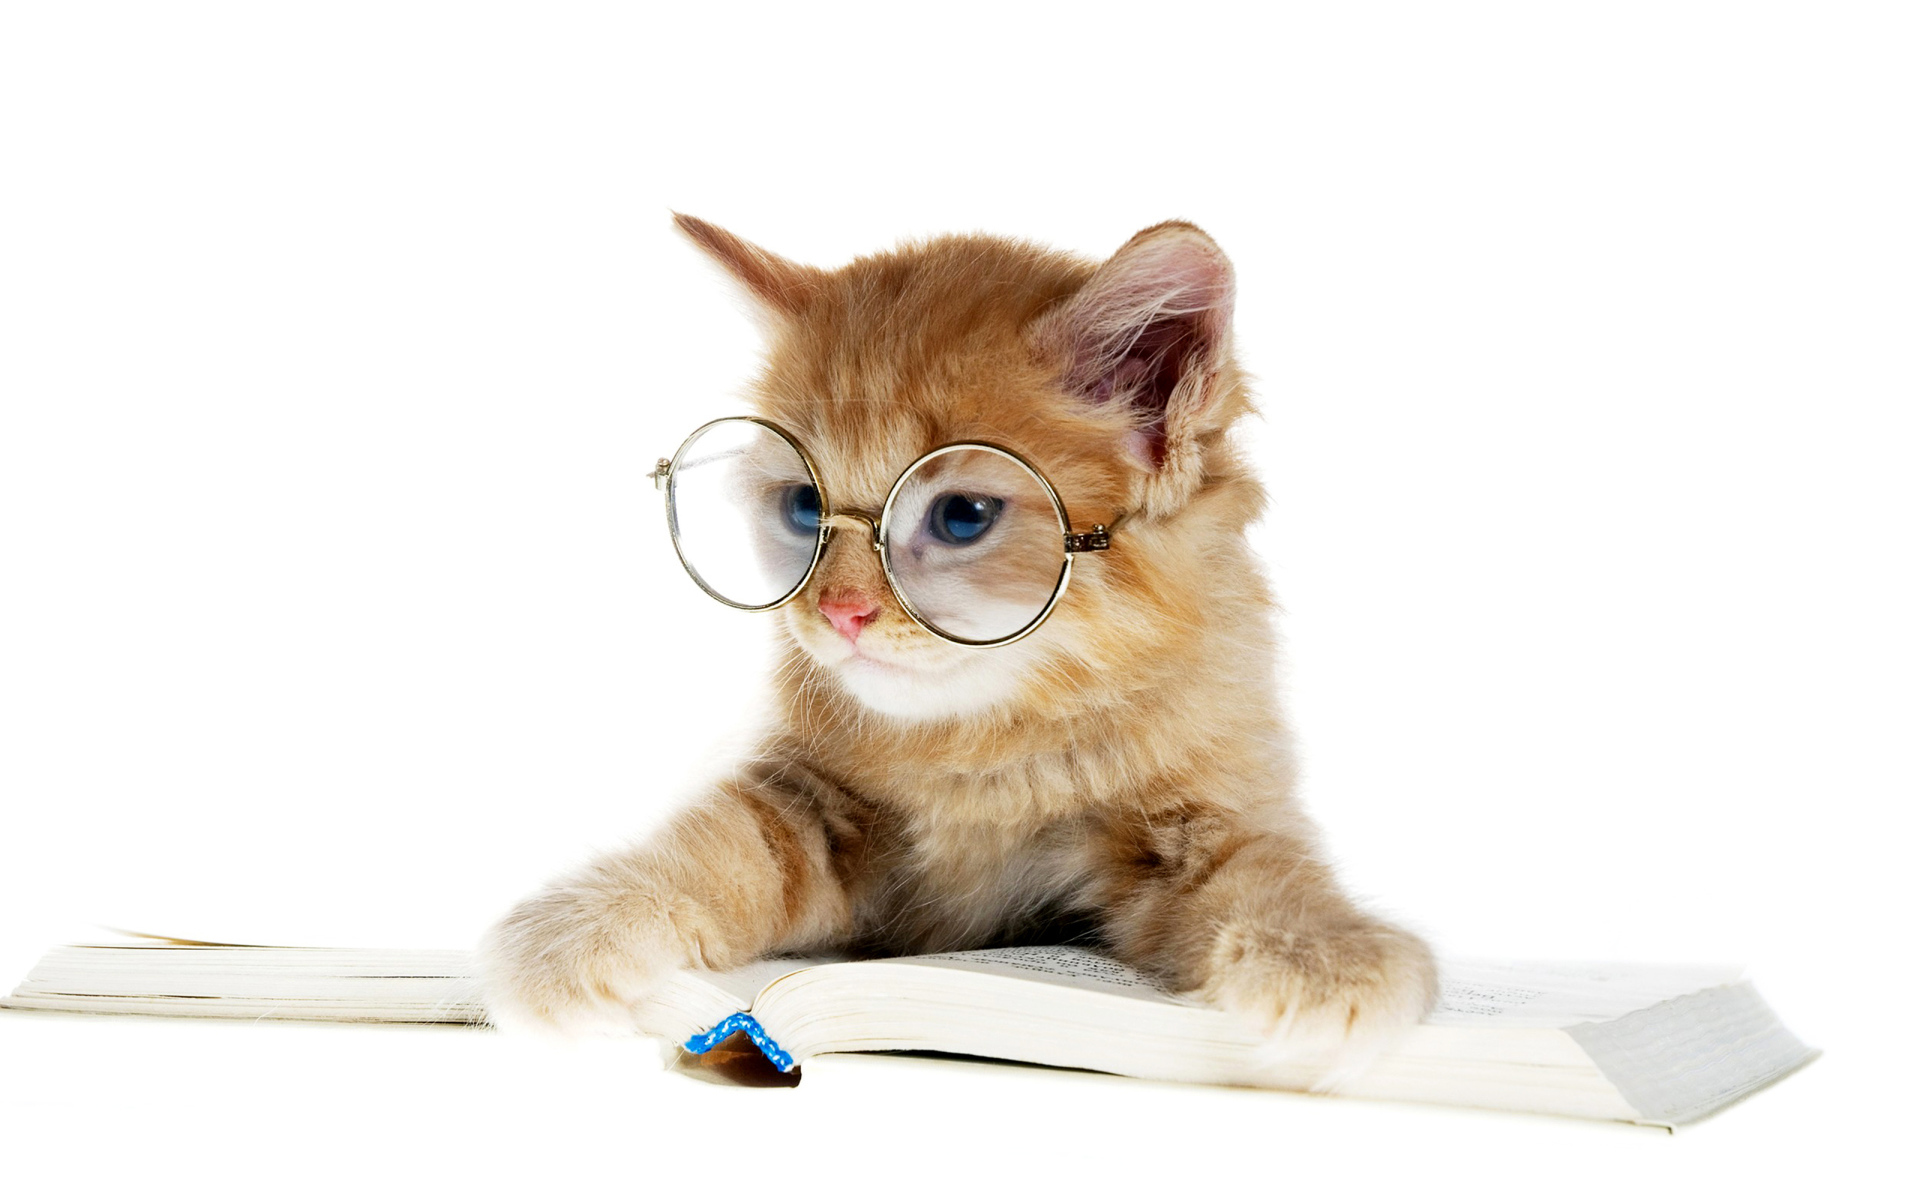 Little kitten with glasses with a book